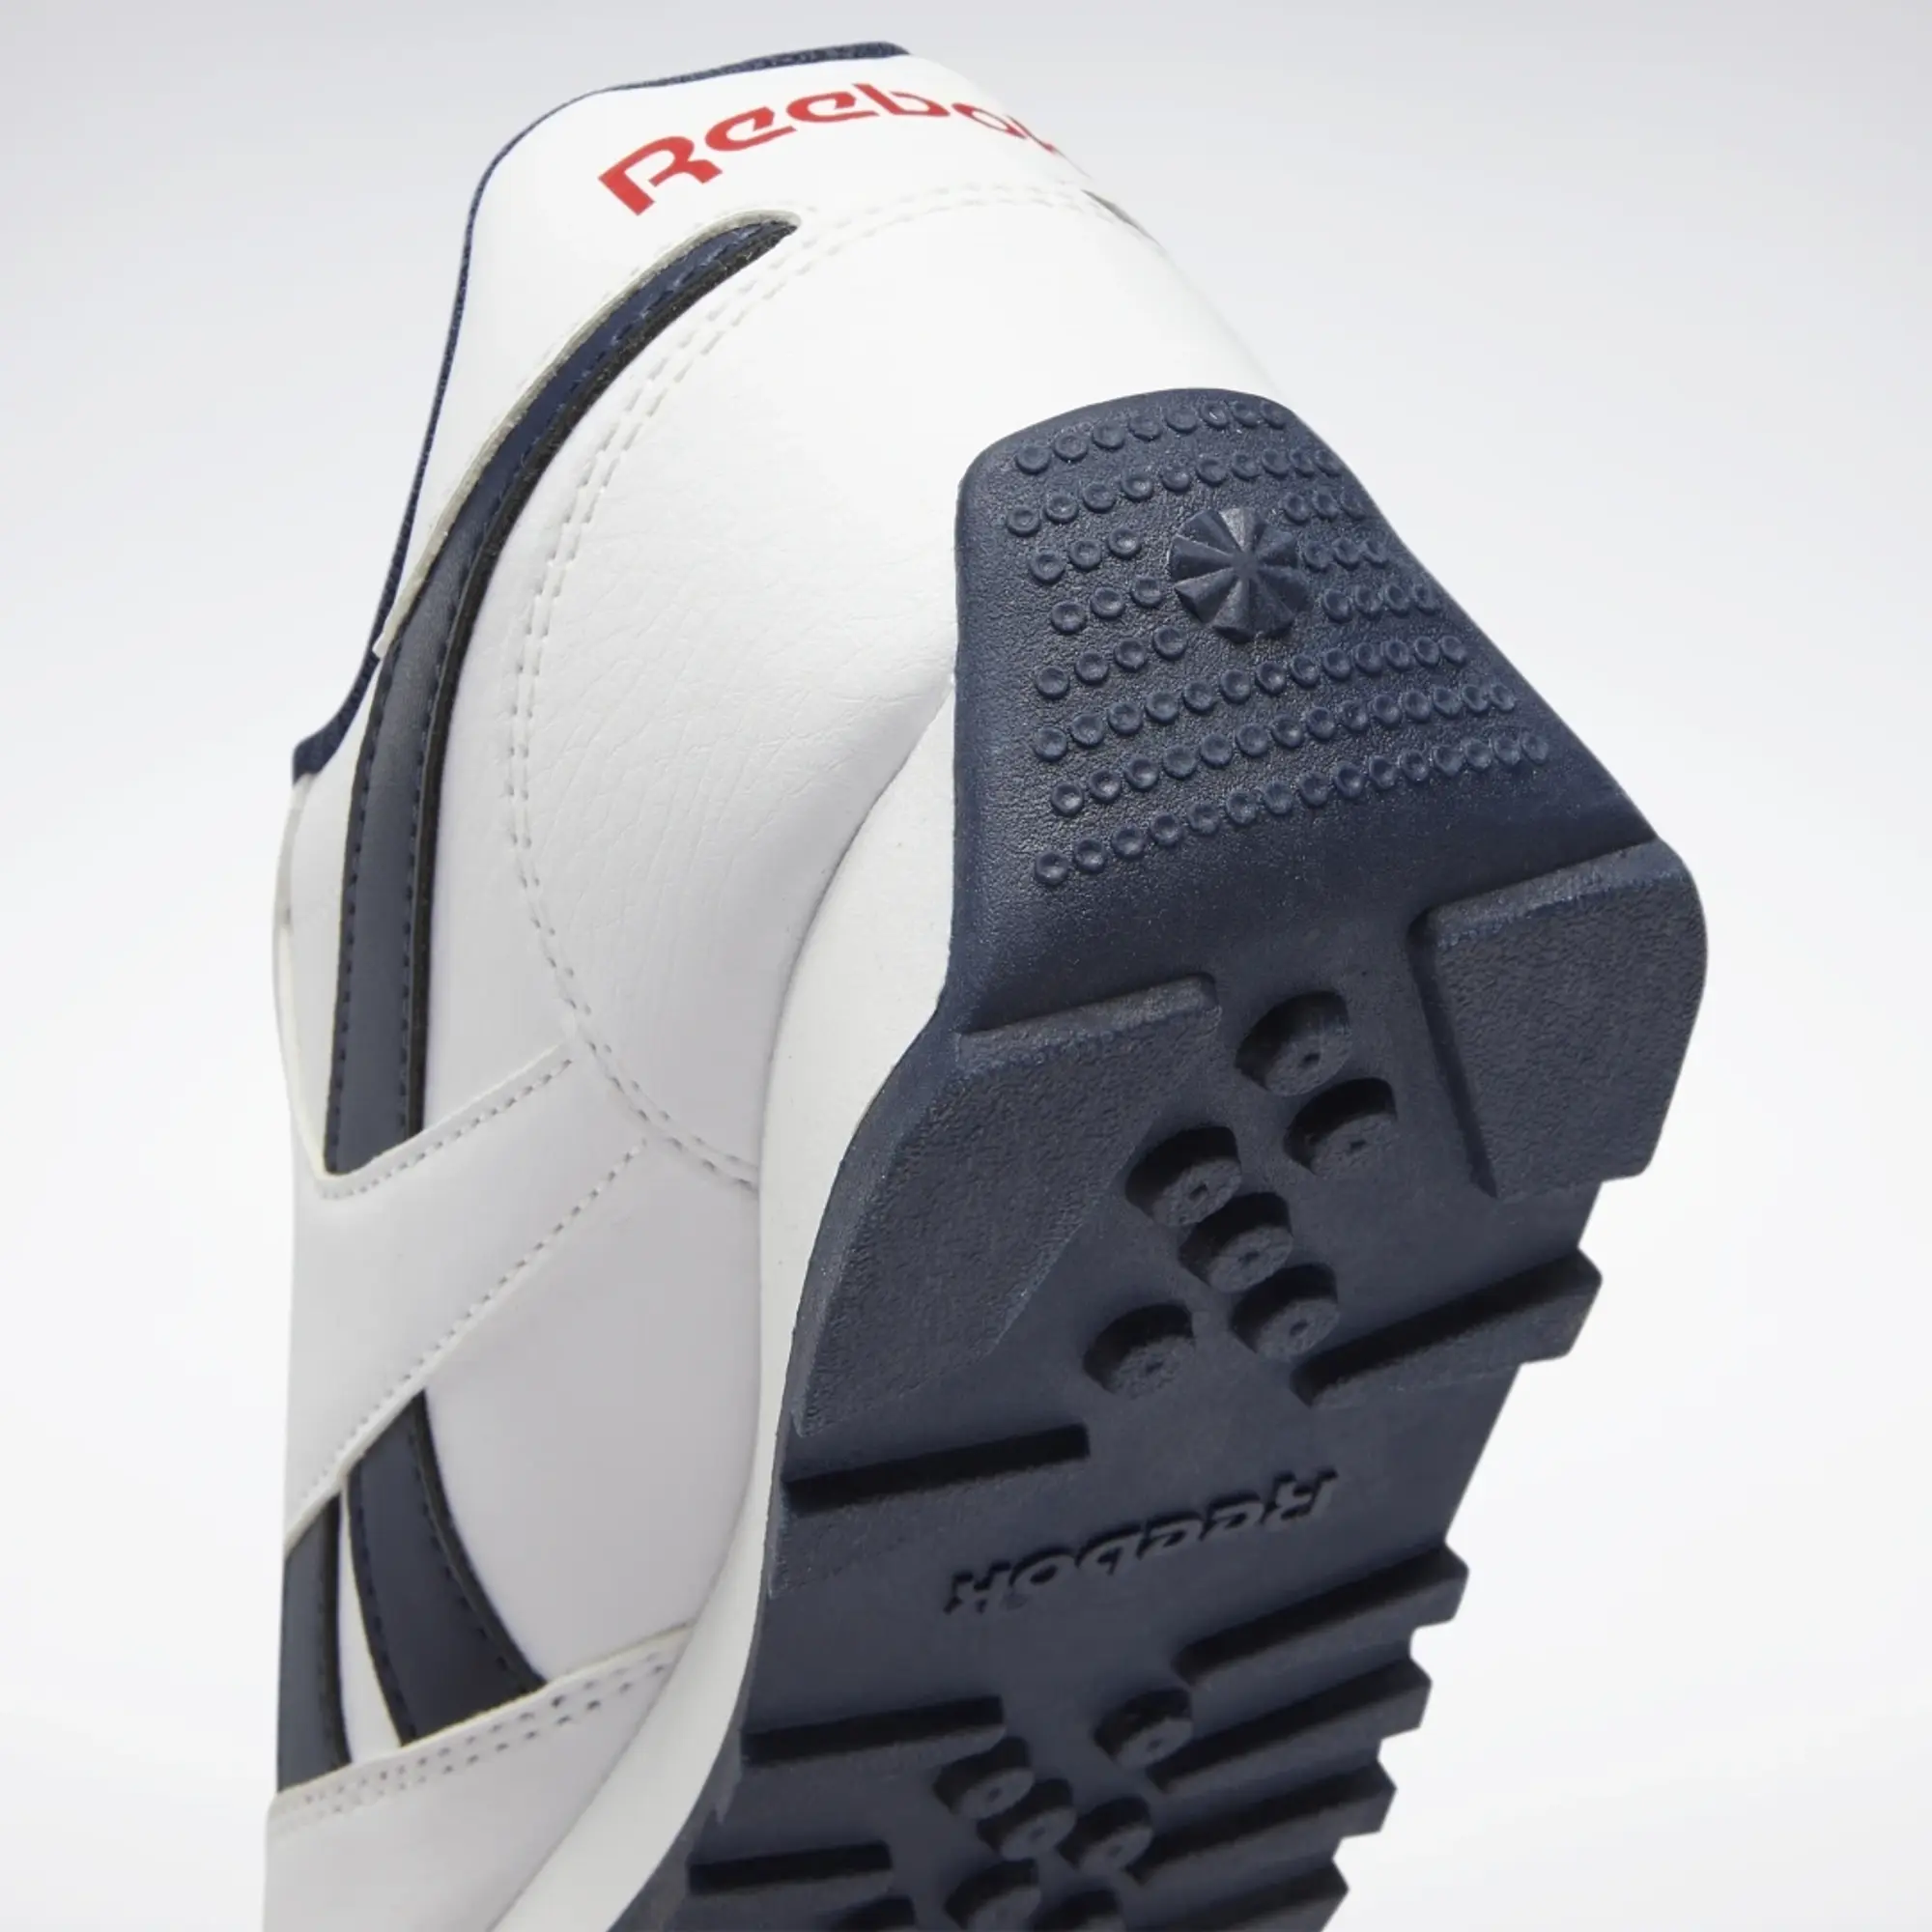 Reebok Youths Royal Rewind Trainers (White/Navy) Colour: White/Navy,